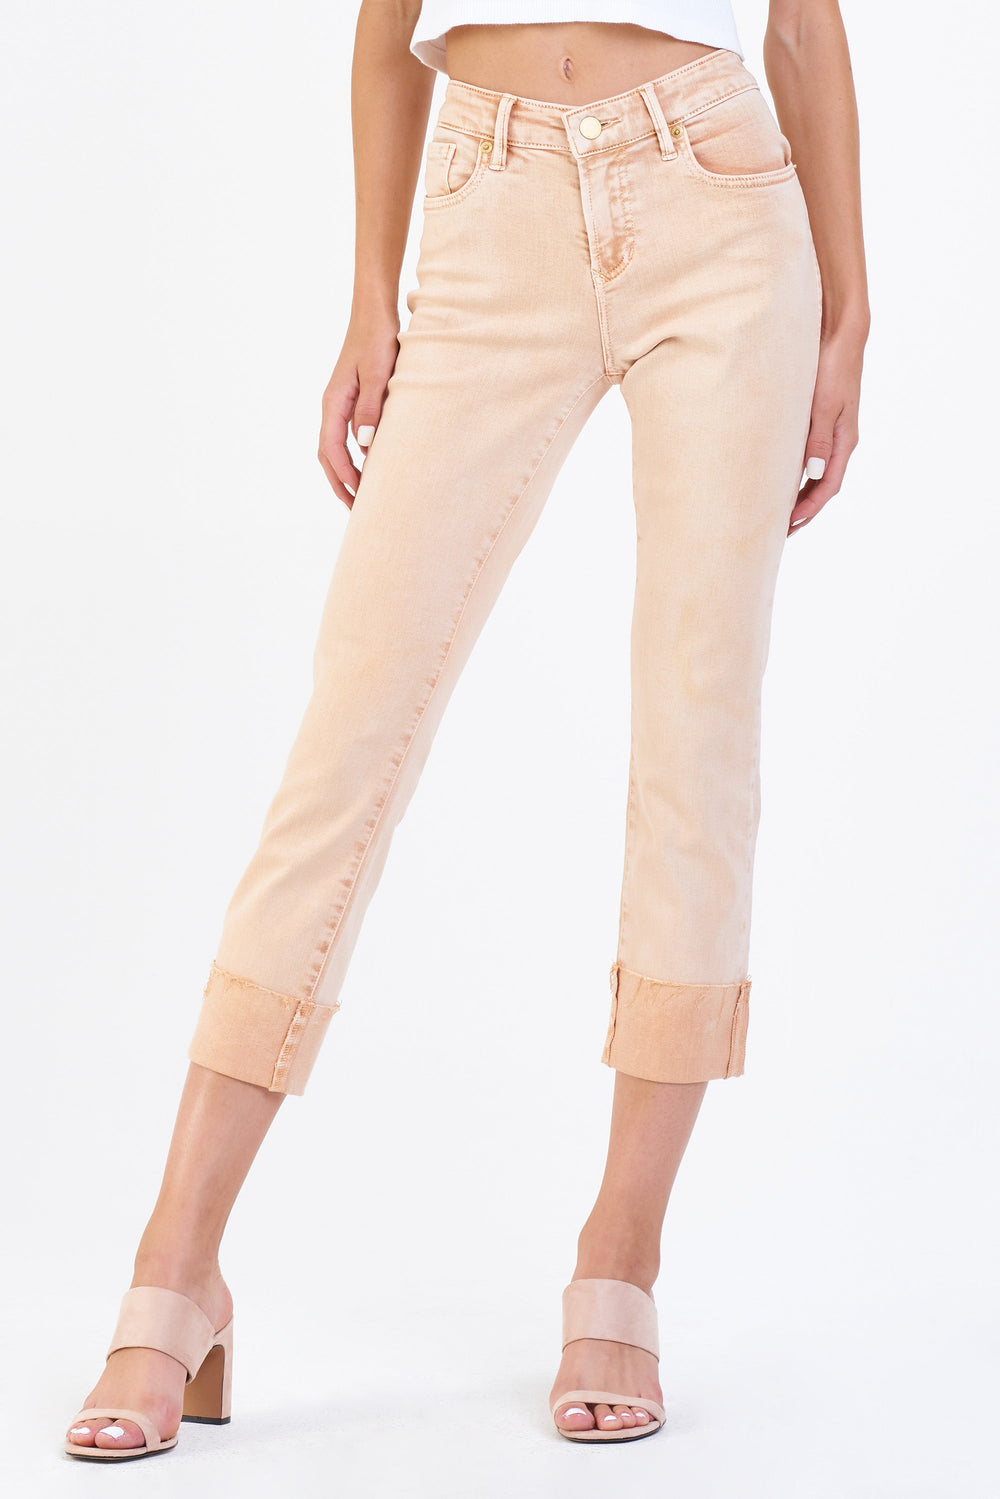 image of a female model wearing a BLAIRE HIGH RISE CUFFED SLIM STRAIGHT JEANS GOLDEN CREAM JEANS